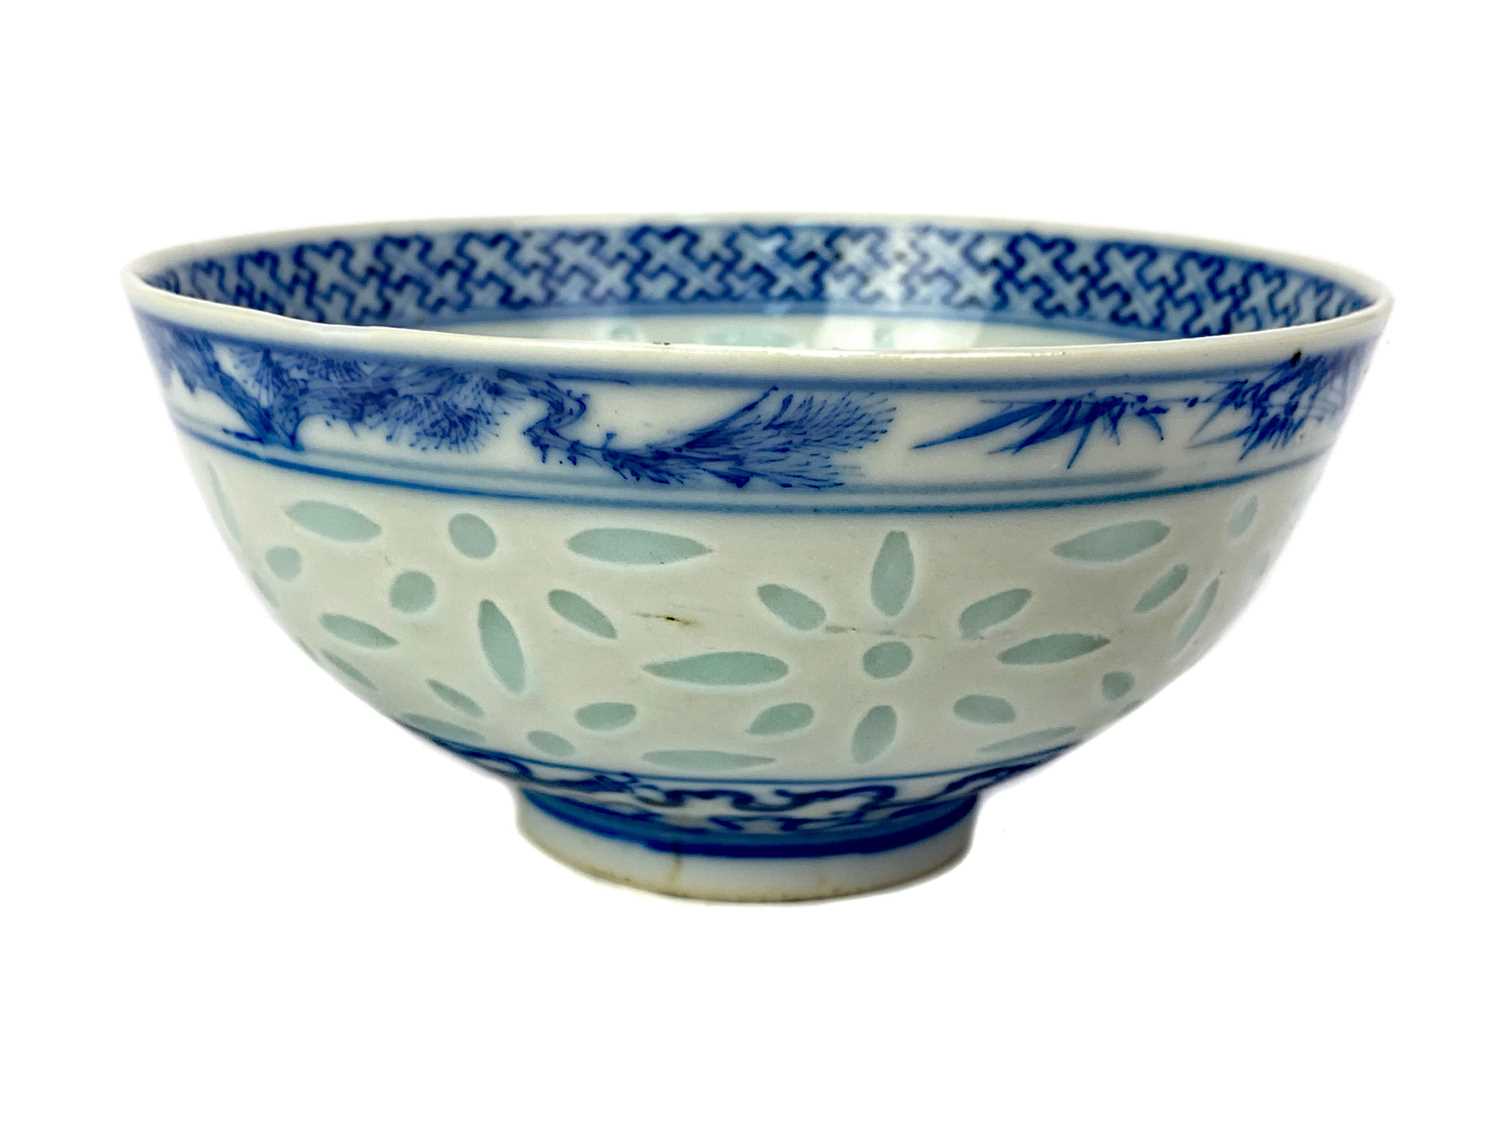 Lot 757 - A CHINESE BLUE AND WHITE PORCELAIN CIRCULAR BOWL